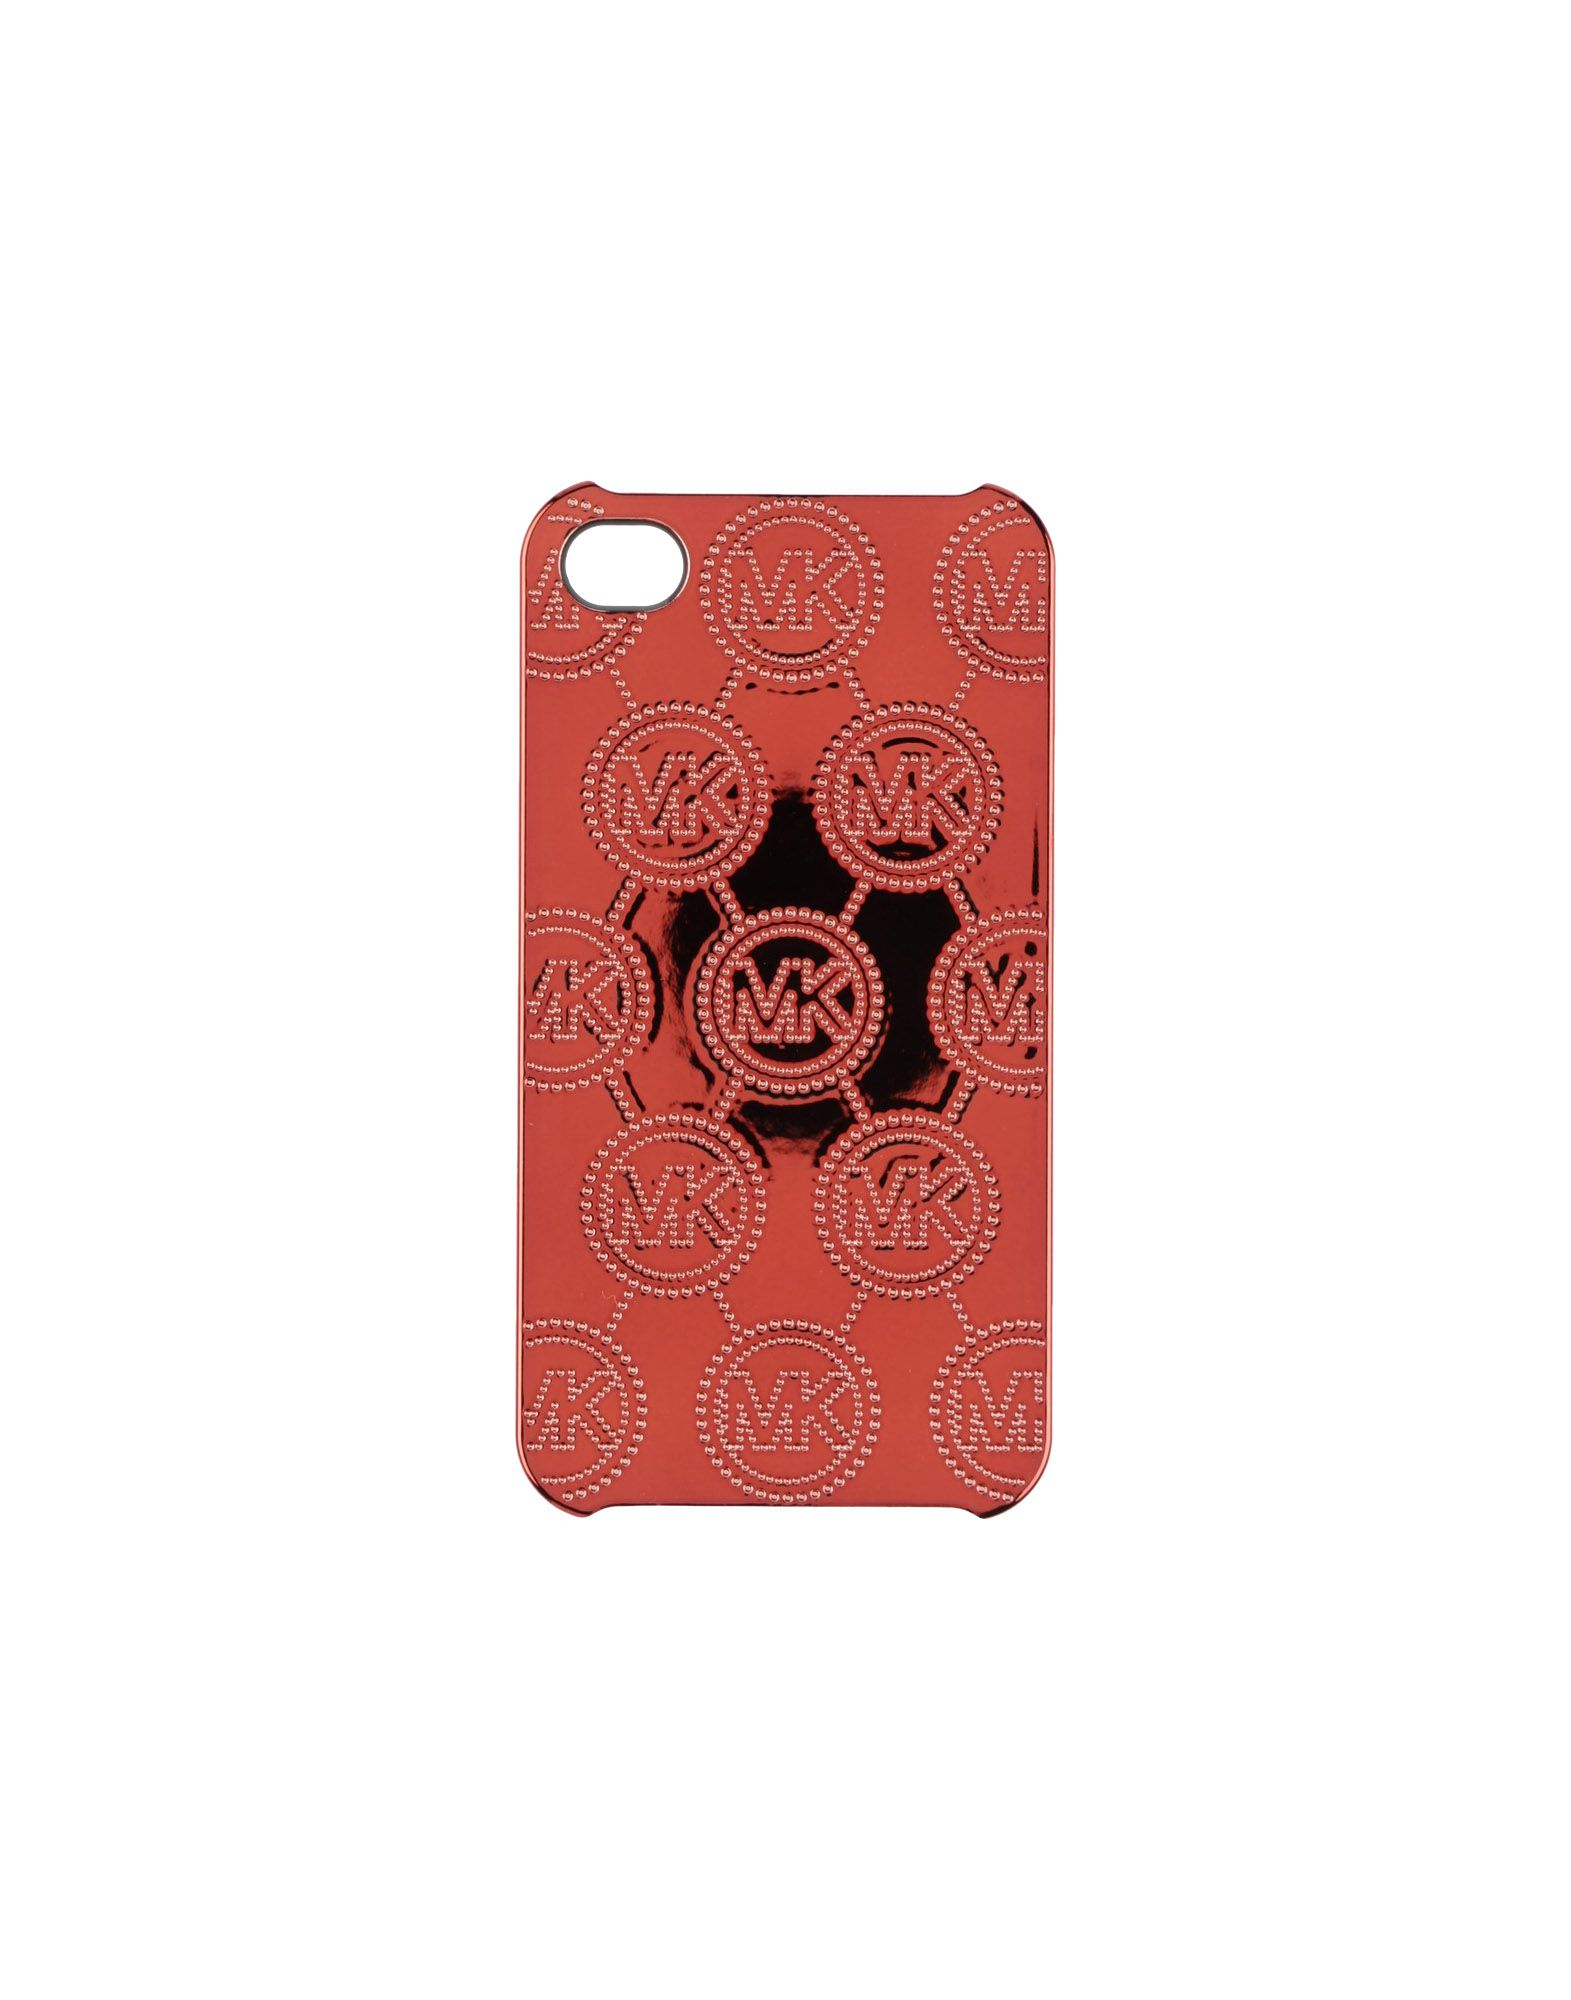 Michael Kors Mobile Phone Case in Red